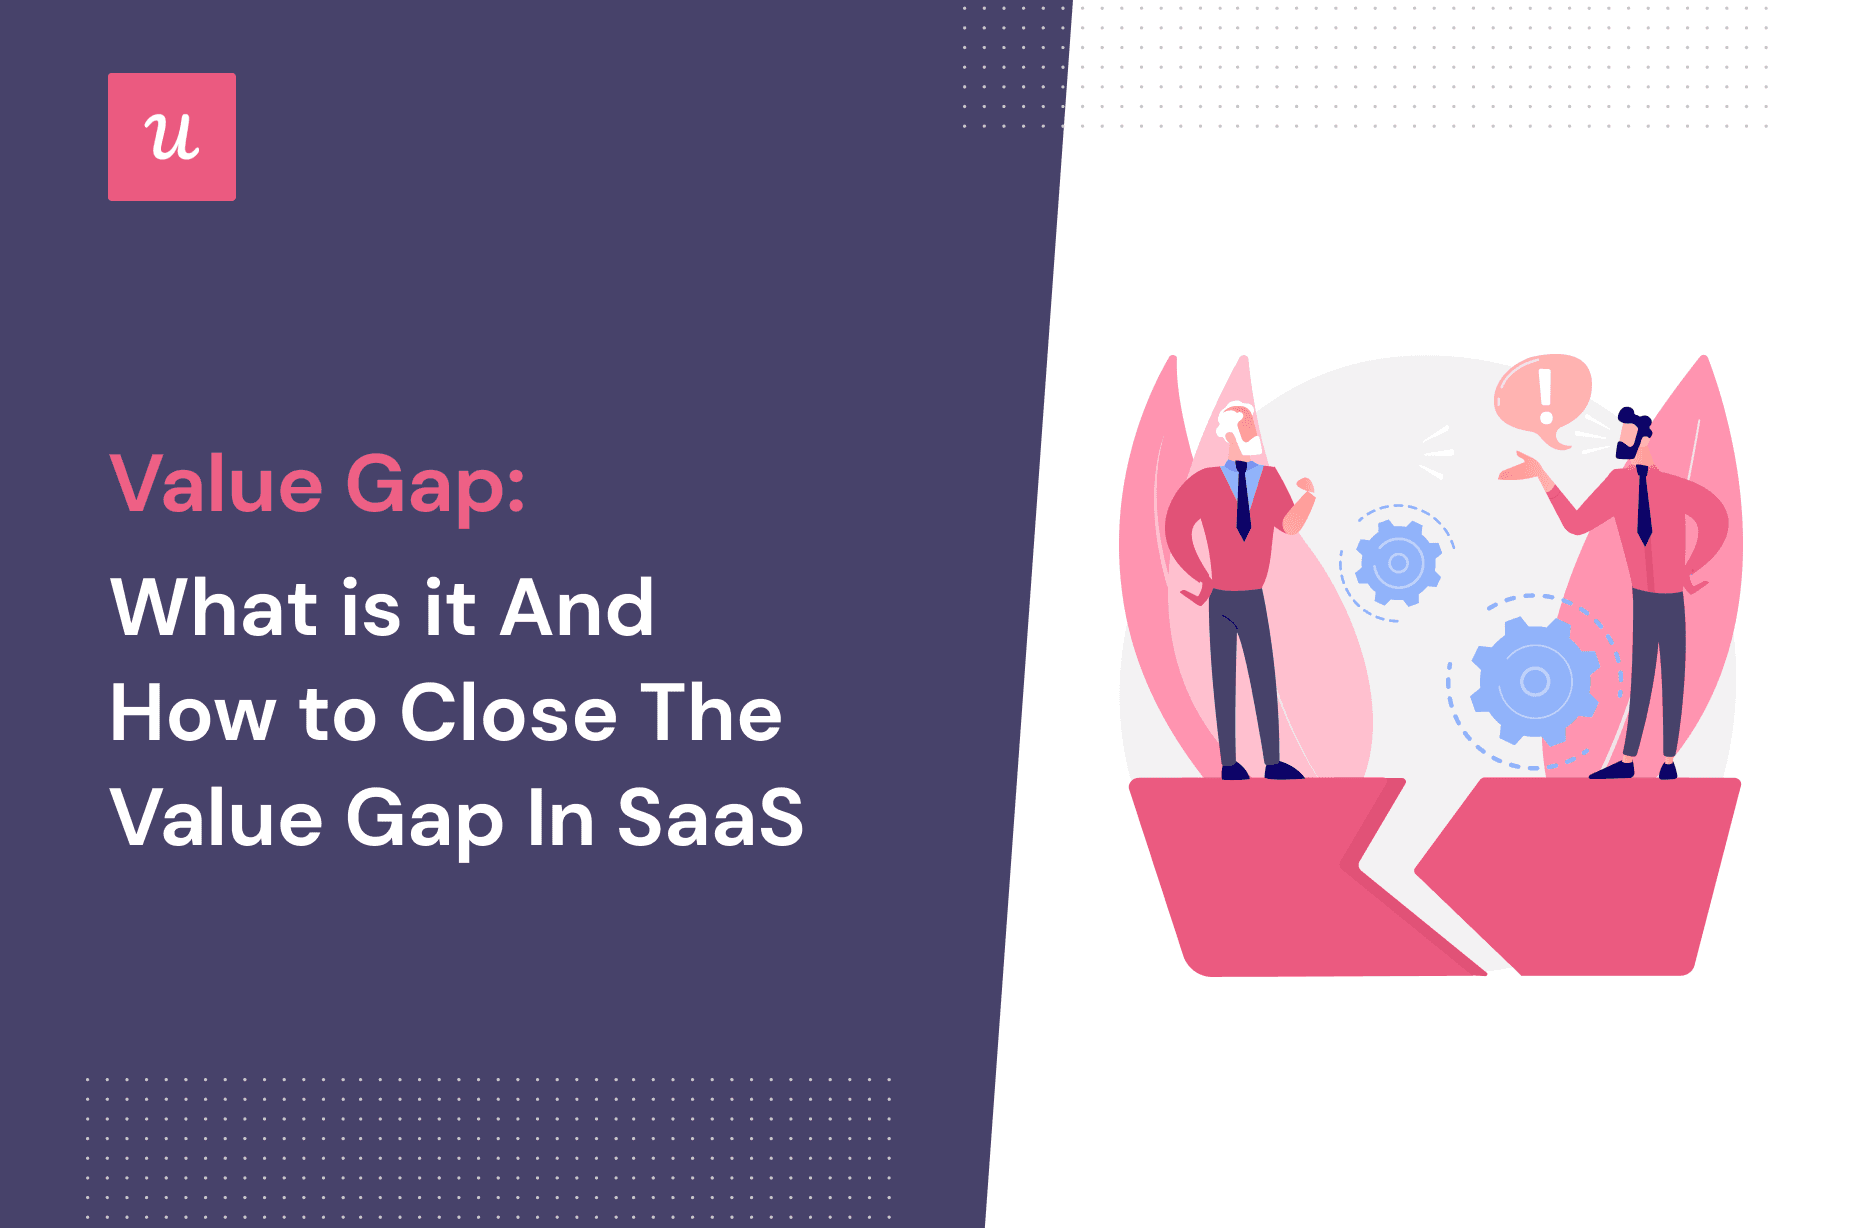 Value Gap: What Is It and How To Close the Value Gap in SaaS?